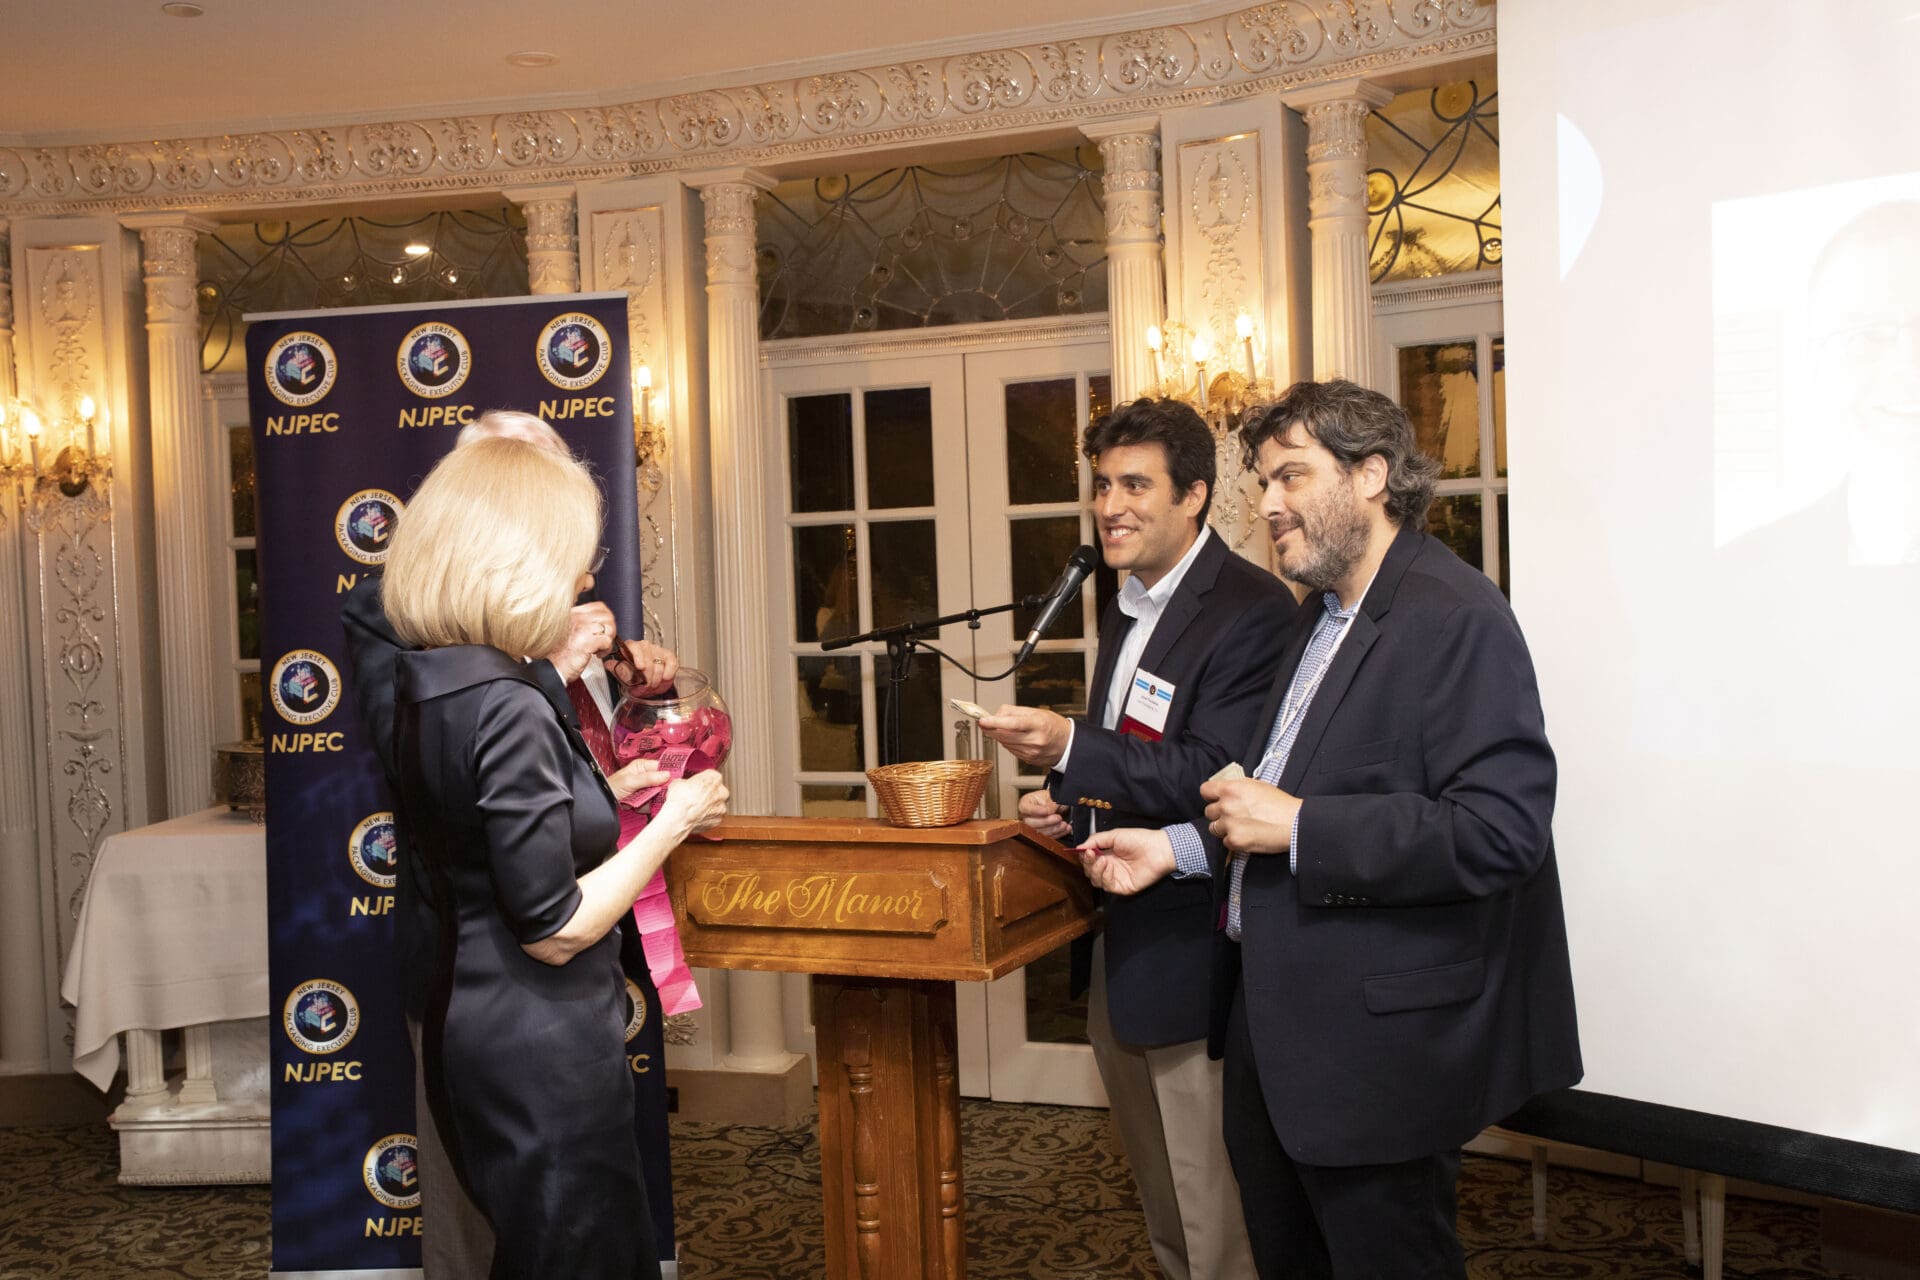 Three people standing at a podium.